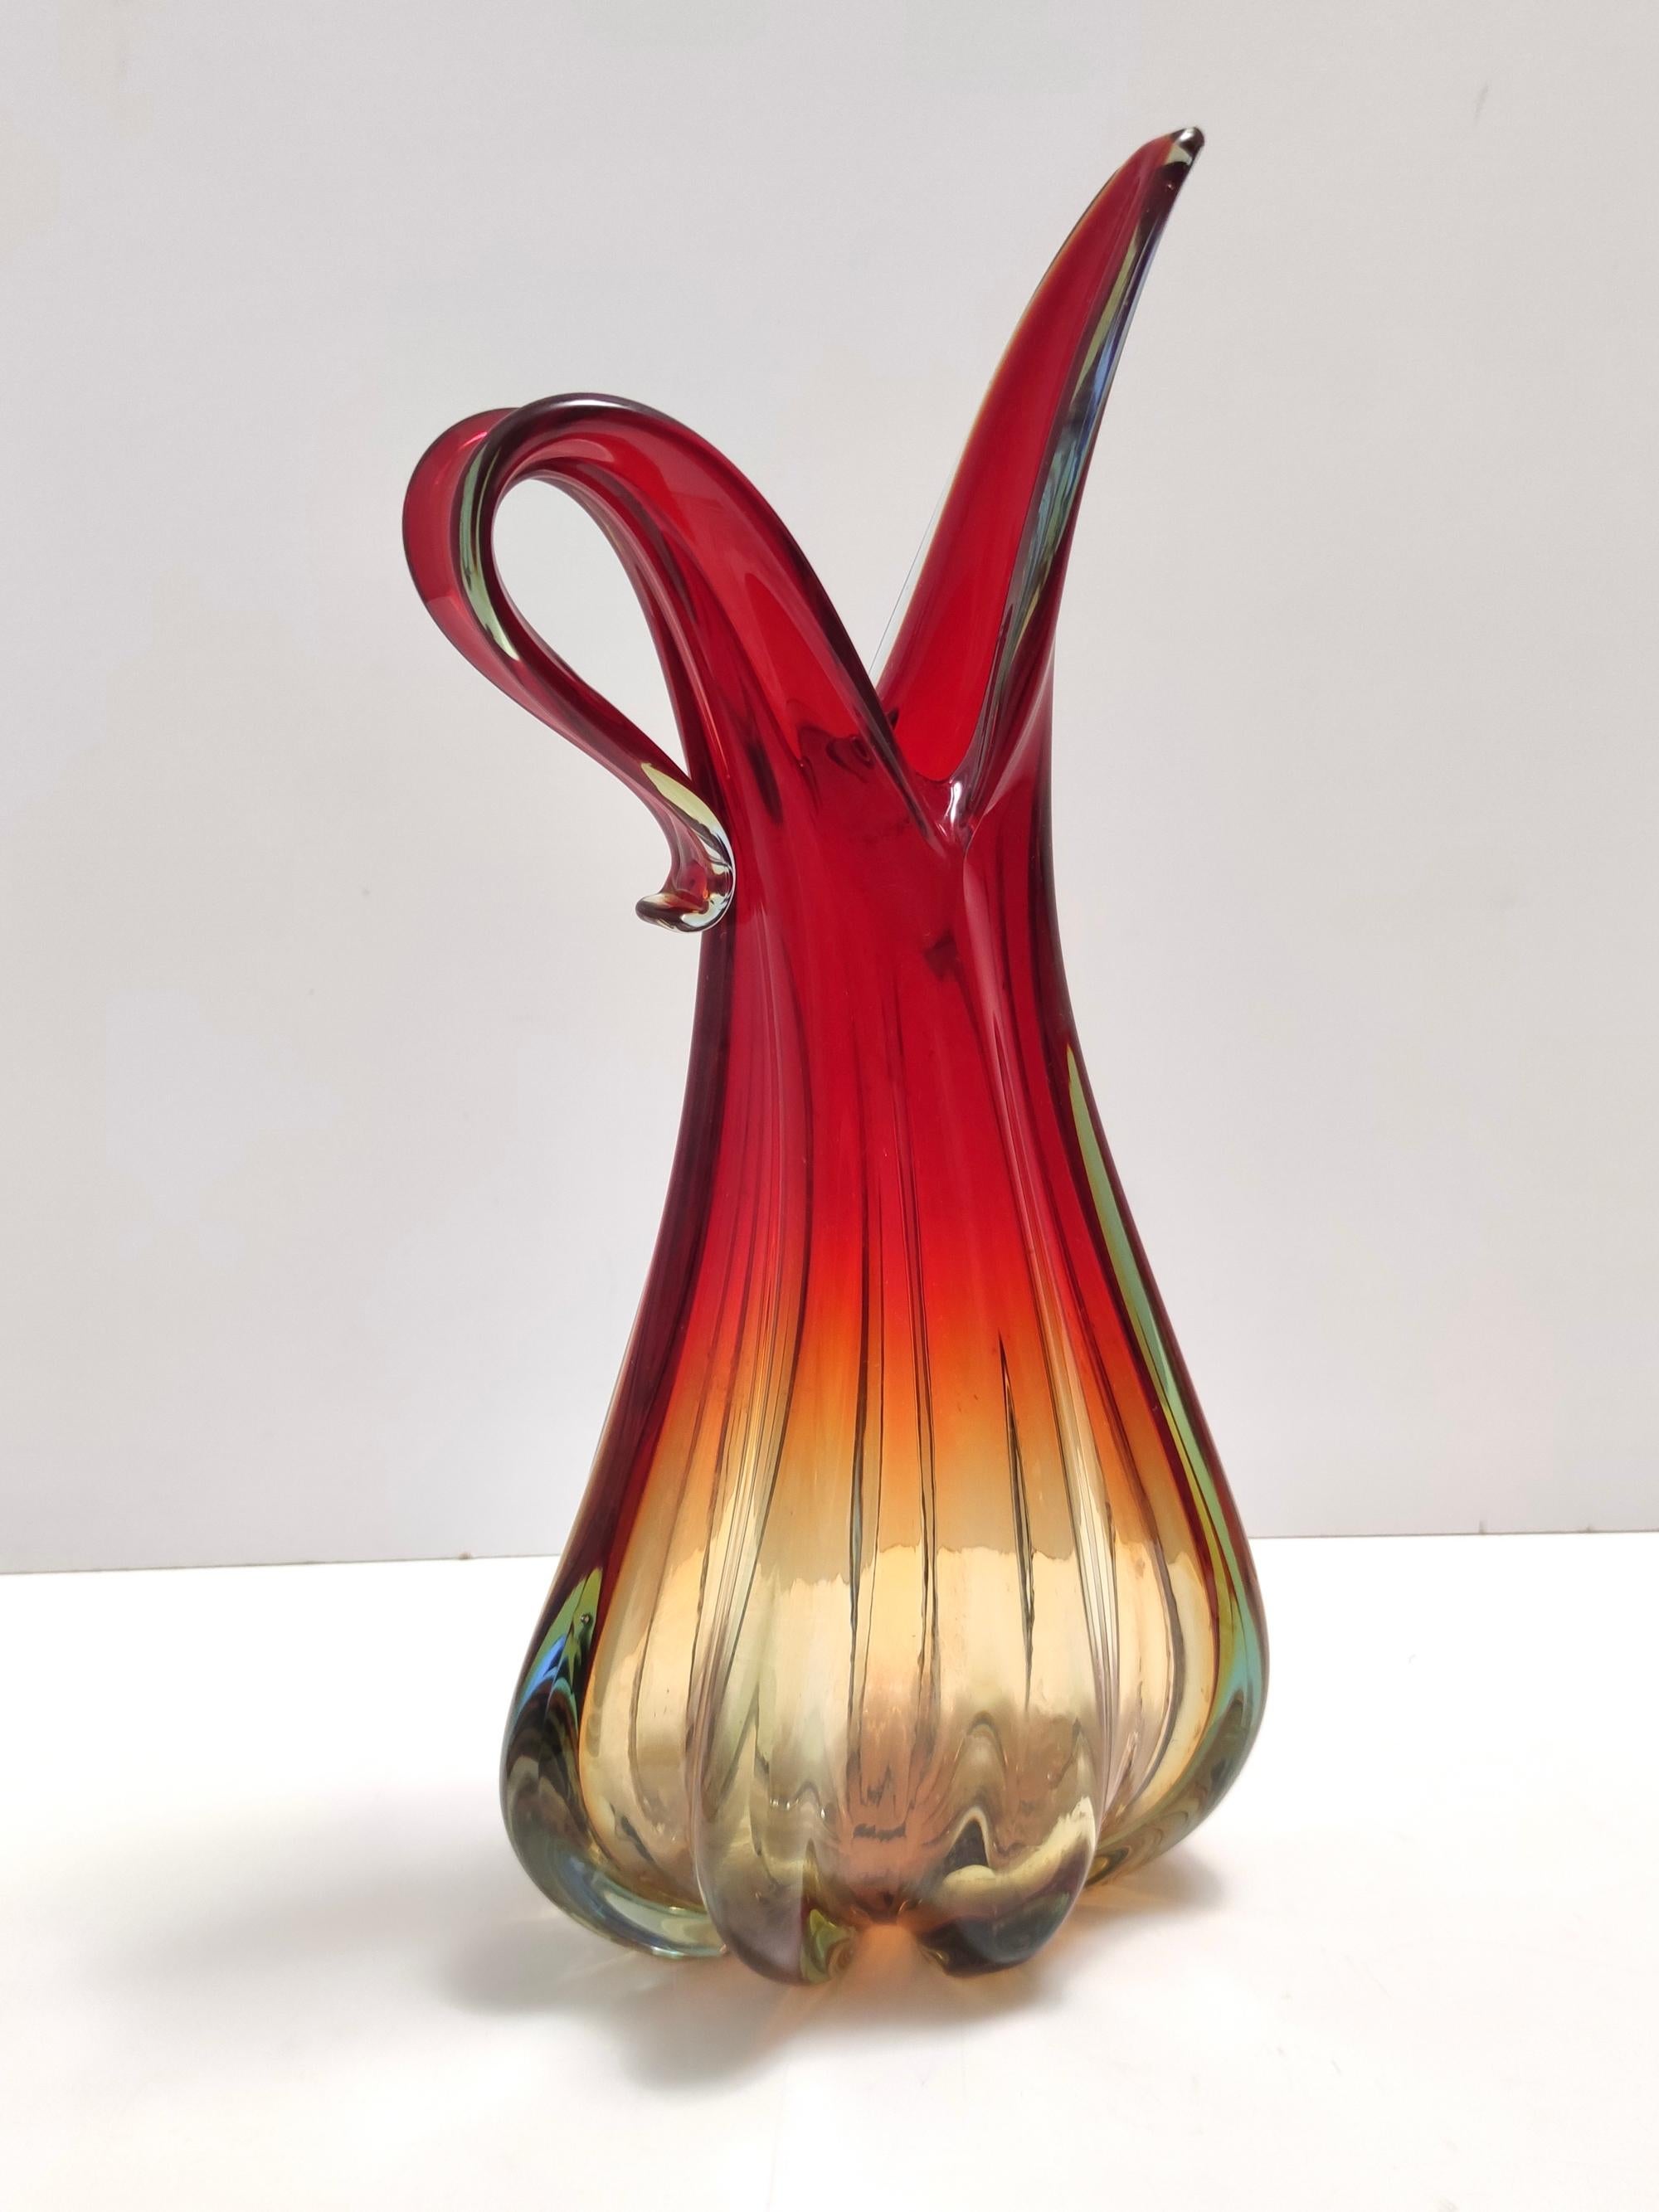 Stunning Vintage Red, Orange and Yellow Sommerso Murano Glass Vase, Italy In Excellent Condition For Sale In Bresso, Lombardy